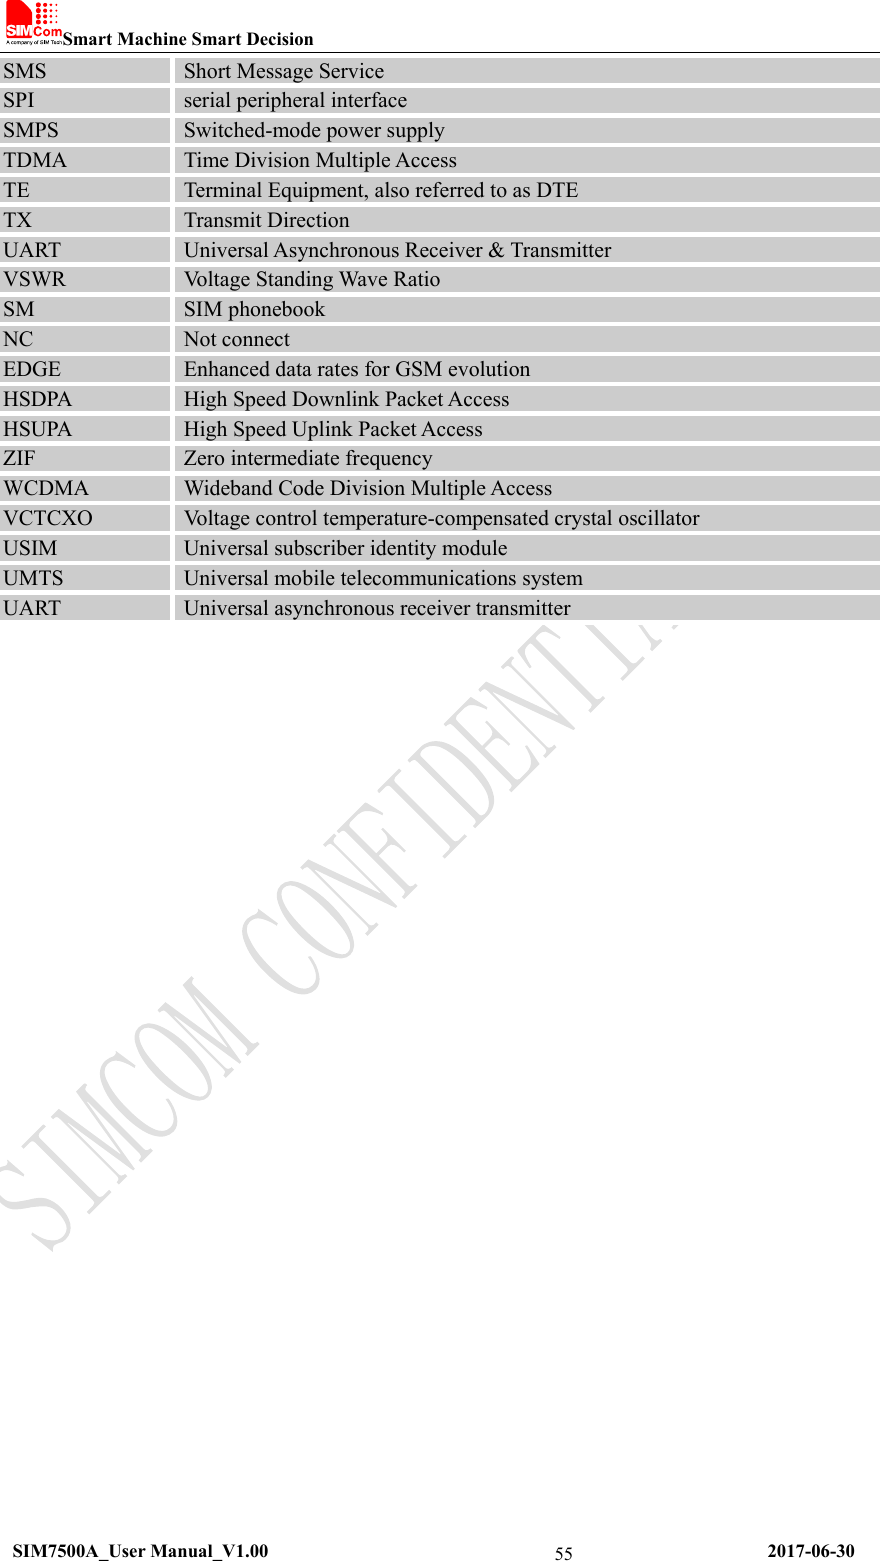 Smart Machine Smart Decision   SIM7500A_User Manual_V1.00                                                      2017-06-30 55SMS  Short Message Service SPI  serial peripheral interface SMPS  Switched-mode power supply TDMA  Time Division Multiple Access TE  Terminal Equipment, also referred to as DTE TX  Transmit Direction UART  Universal Asynchronous Receiver &amp; Transmitter VSWR  Voltage Standing Wave Ratio SM  SIM phonebook NC  Not connect EDGE  Enhanced data rates for GSM evolution HSDPA  High Speed Downlink Packet Access HSUPA  High Speed Uplink Packet Access ZIF  Zero intermediate frequency WCDMA  Wideband Code Division Multiple Access VCTCXO  Voltage control temperature-compensated crystal oscillator USIM  Universal subscriber identity module UMTS  Universal mobile telecommunications system UART  Universal asynchronous receiver transmitter     